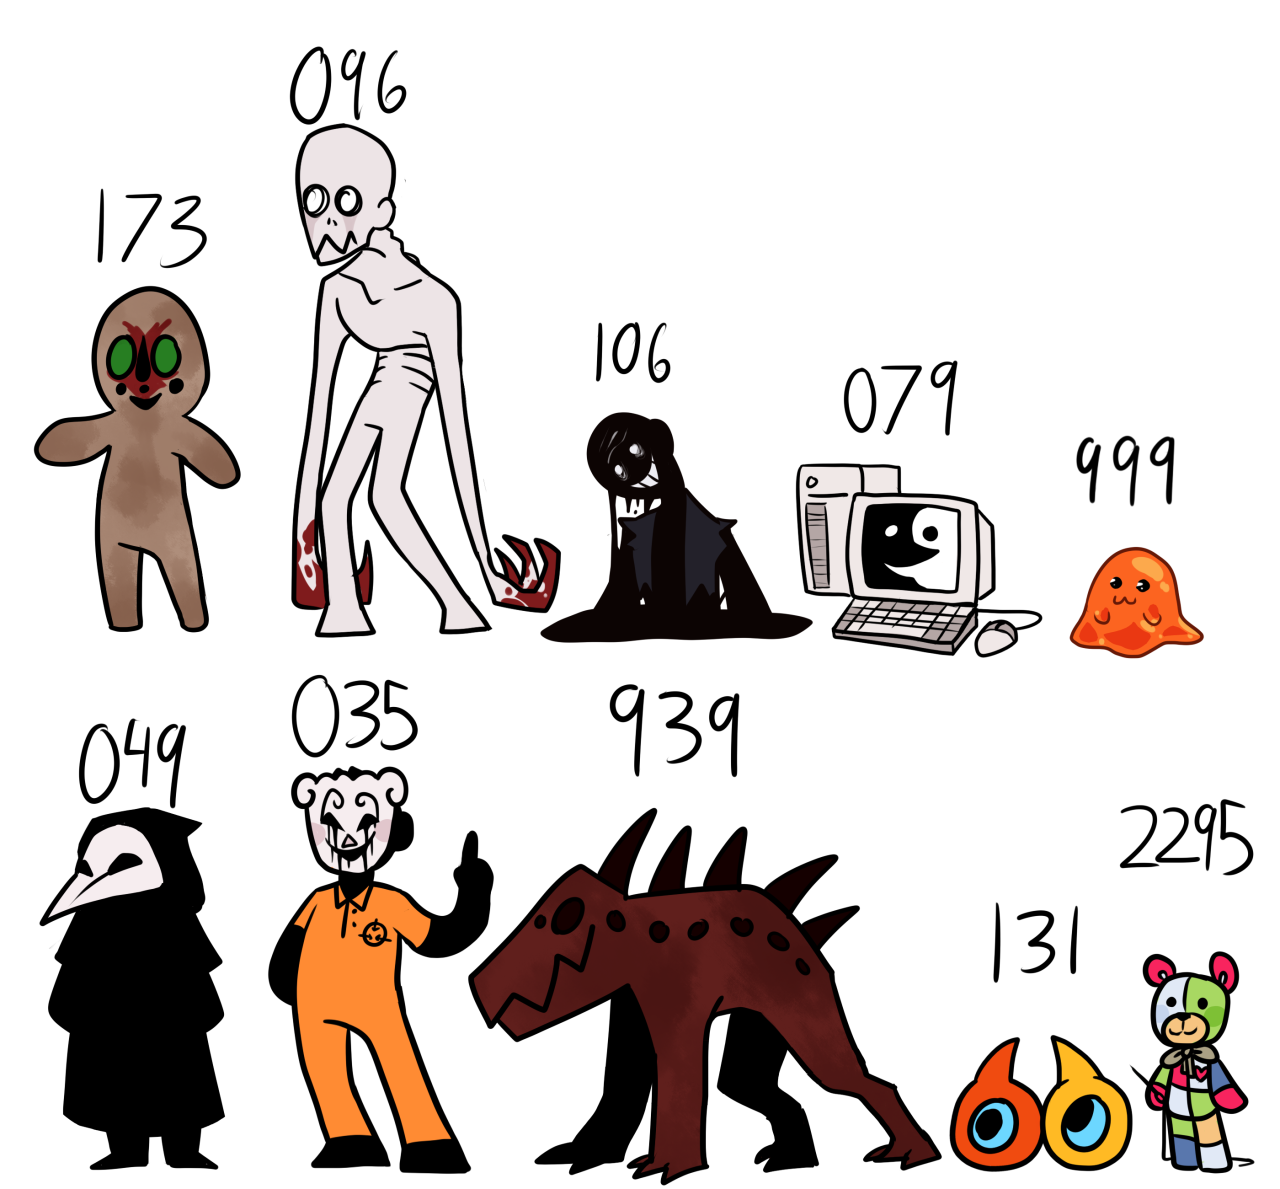 SCP meeting (involving: SCP-096, SCP-457, SCP-173, and SCP-049